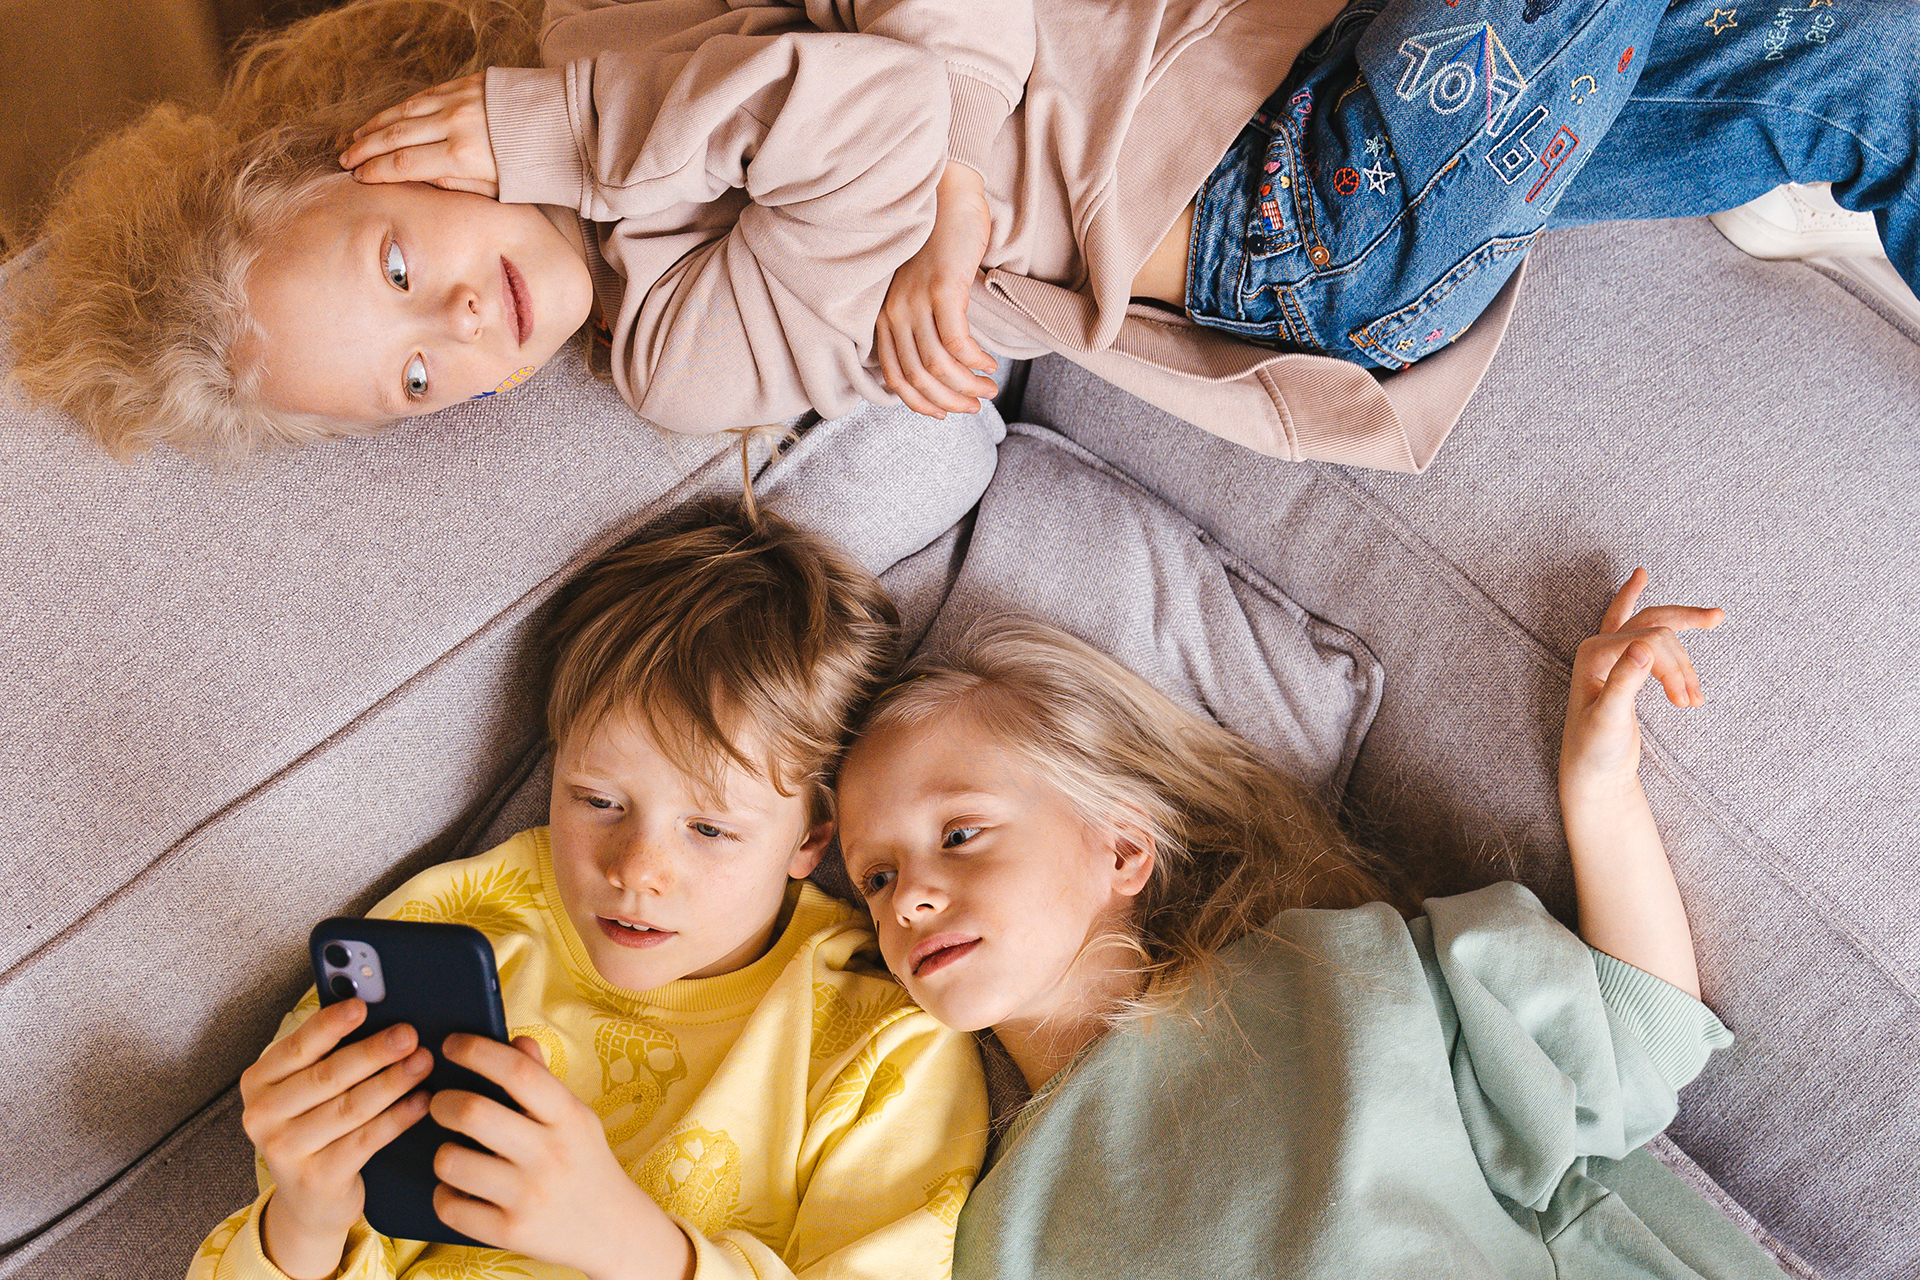 Balancing Screen Time and Healthy Development: Kids looking at a smart phone